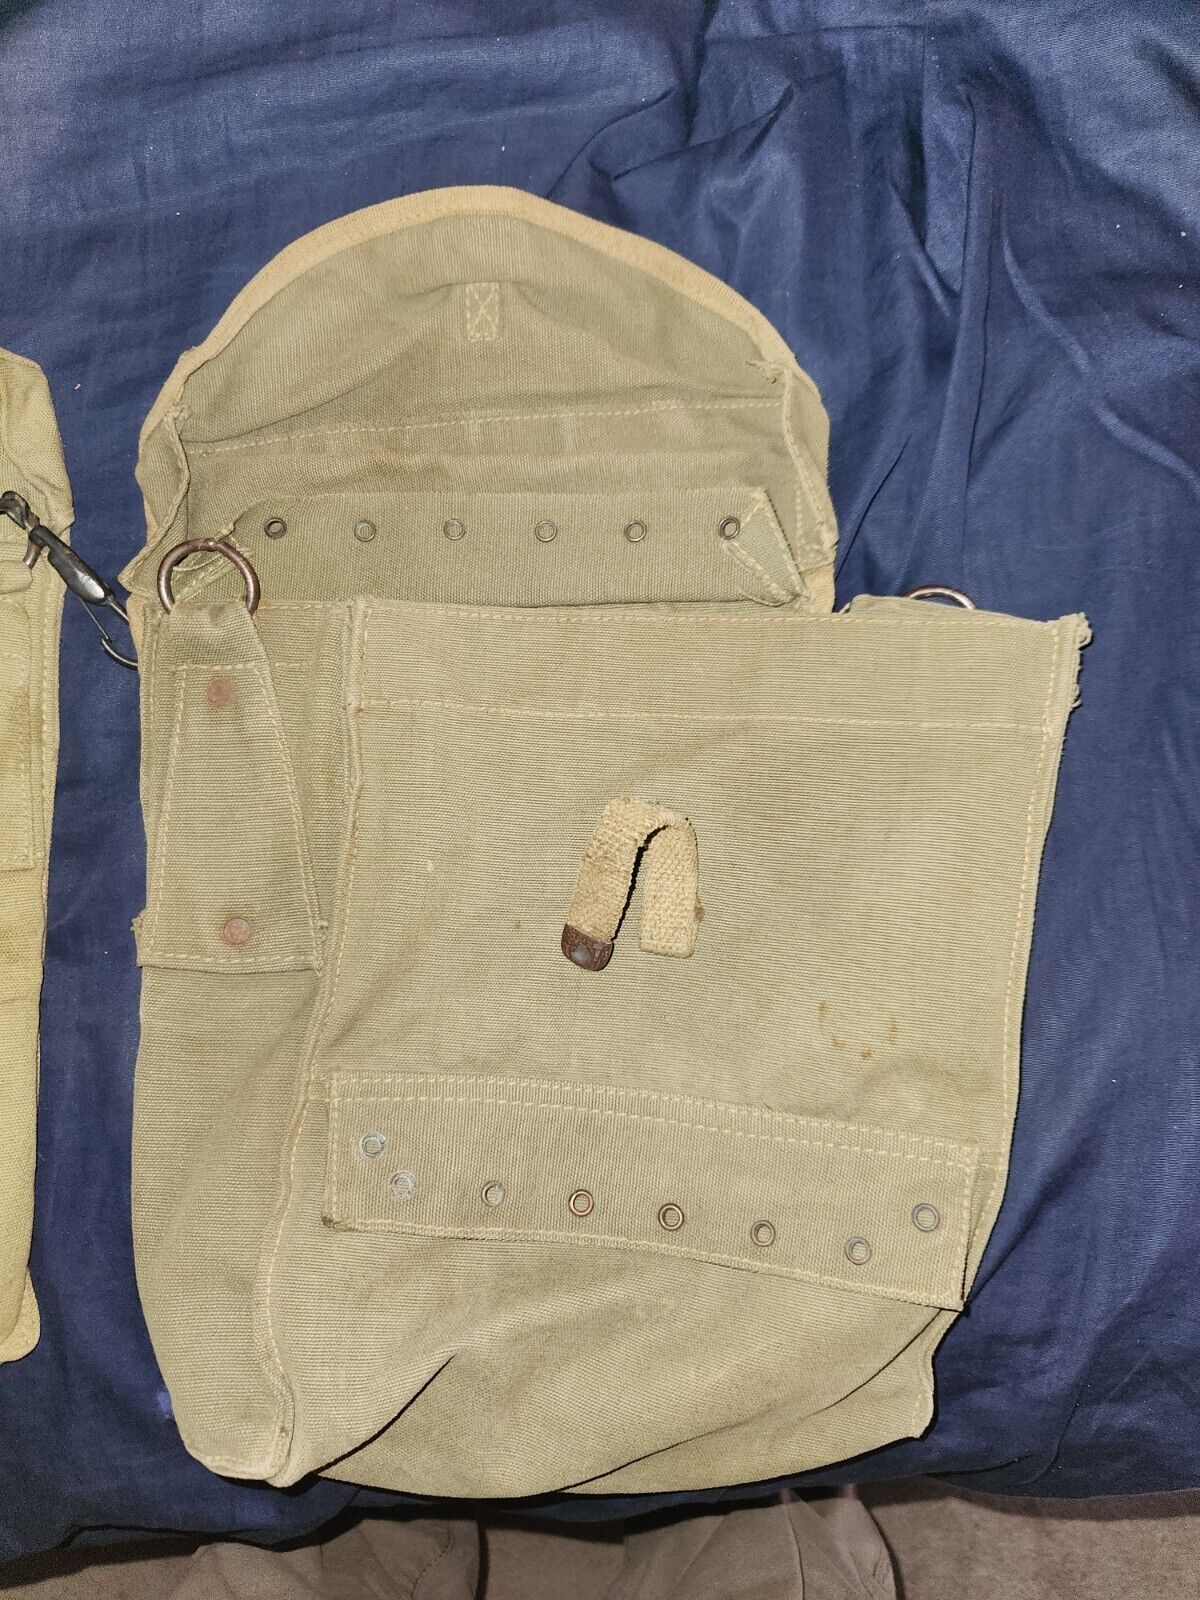 WW2 US Medic Bag Used By French. US Shipping Only 